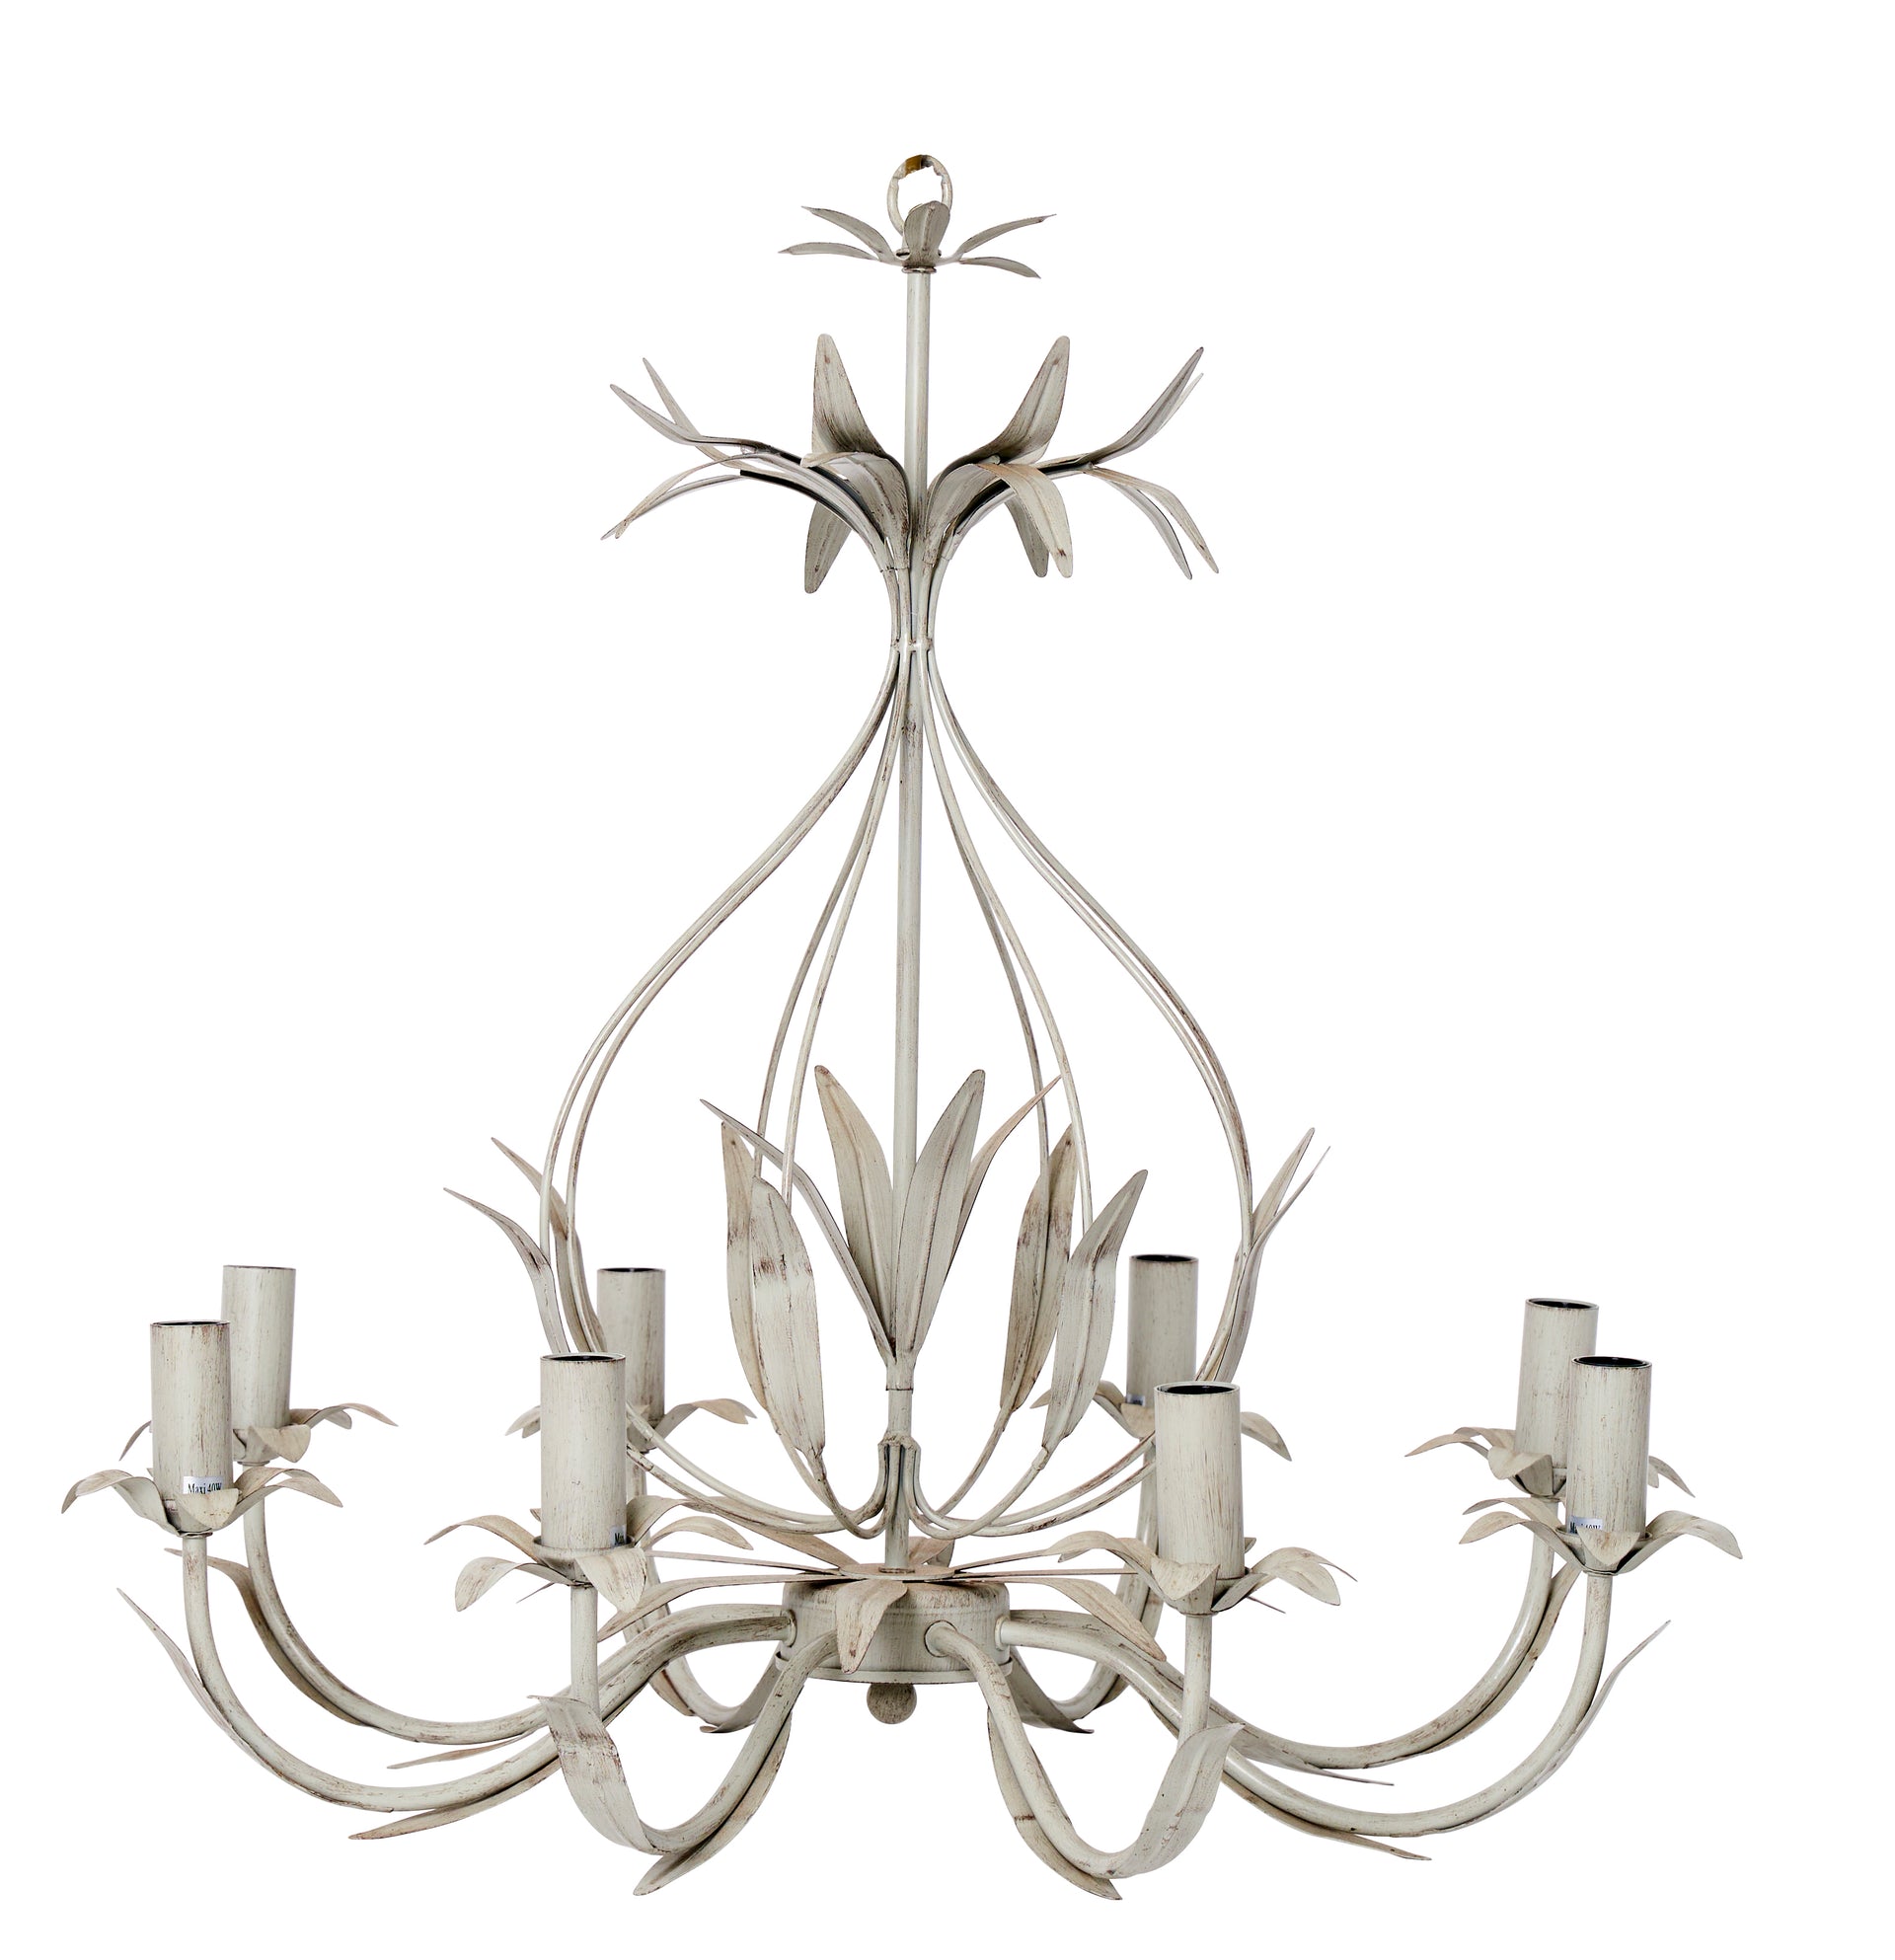 SOLD A pale grey painted metal chandelier, French 20th Century